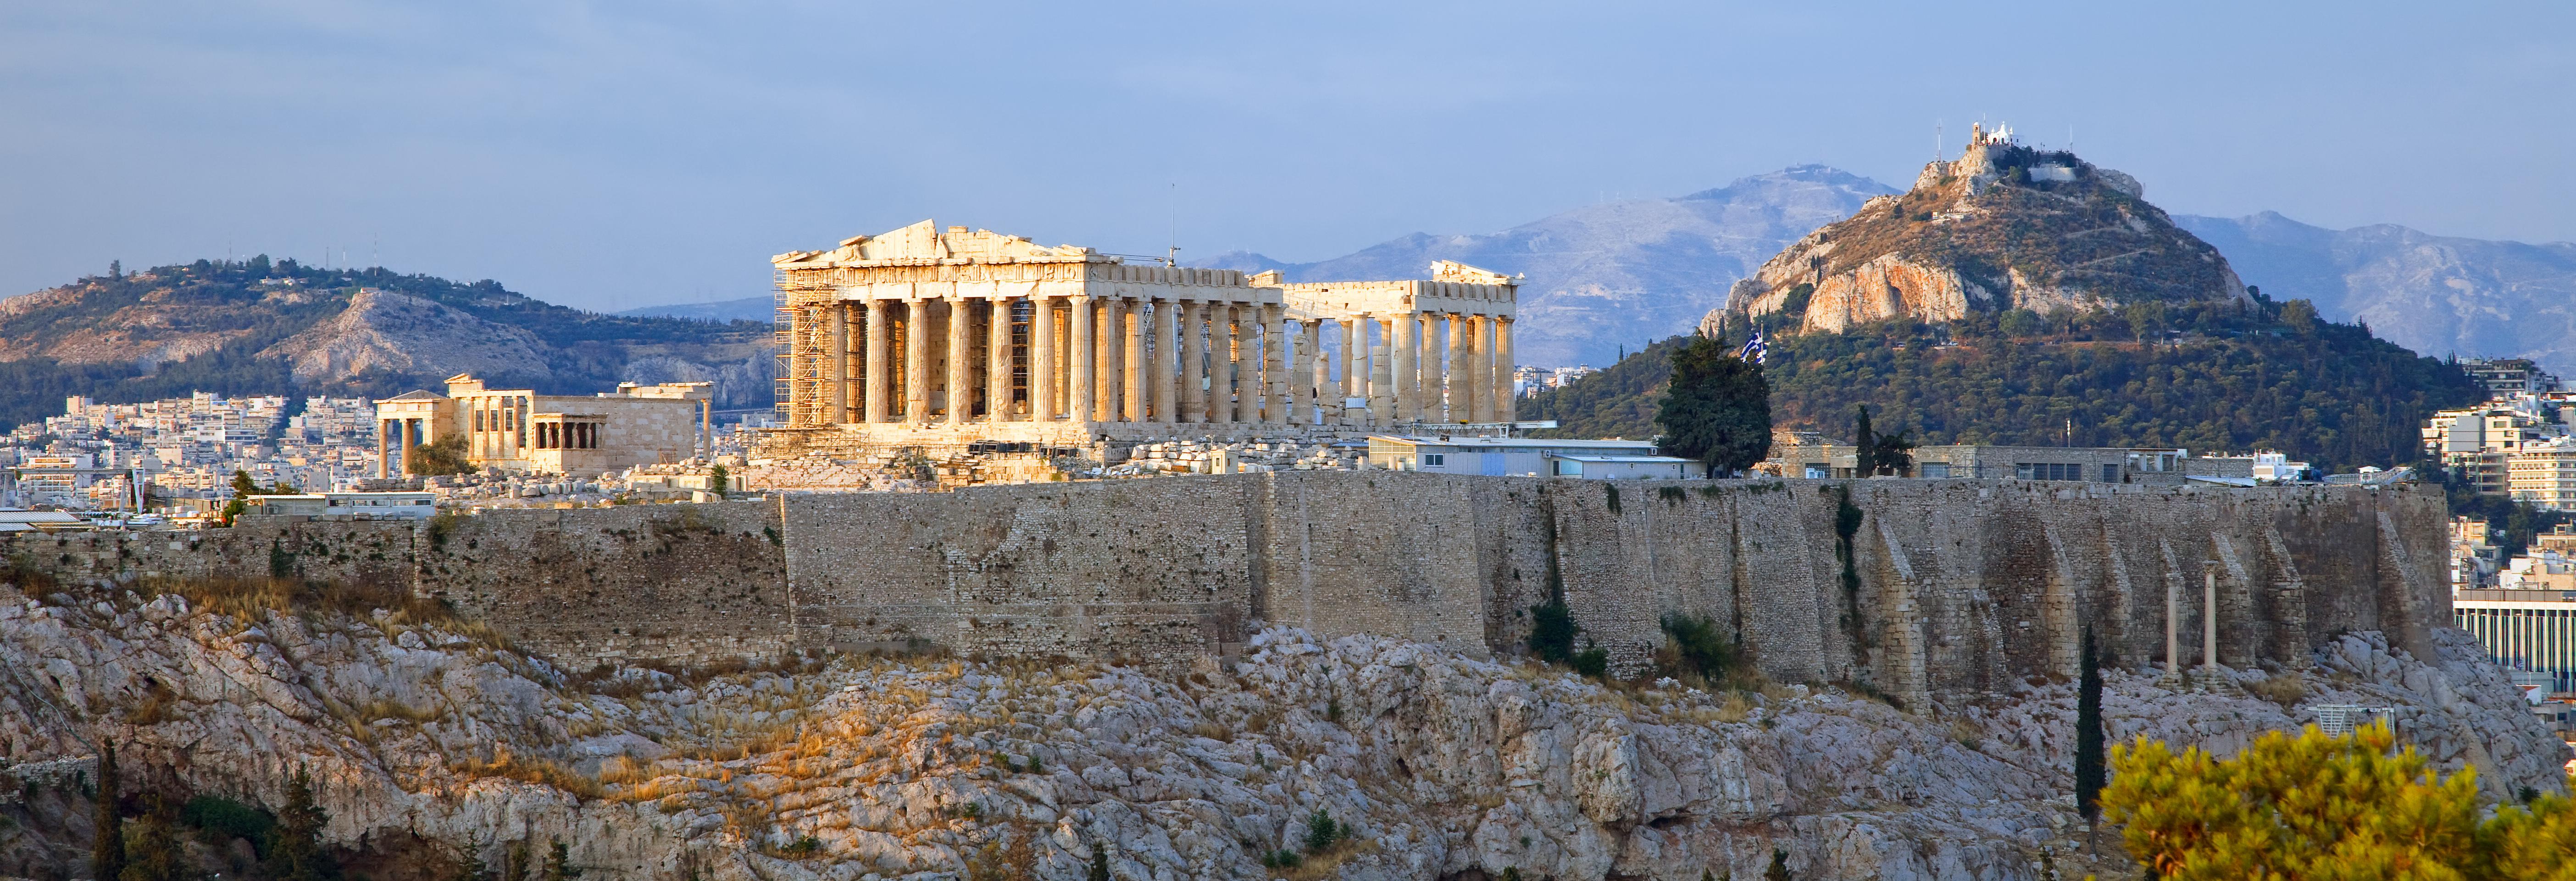 Guided tour of the Acropolis, Athens city tour and the Acropolis Museum